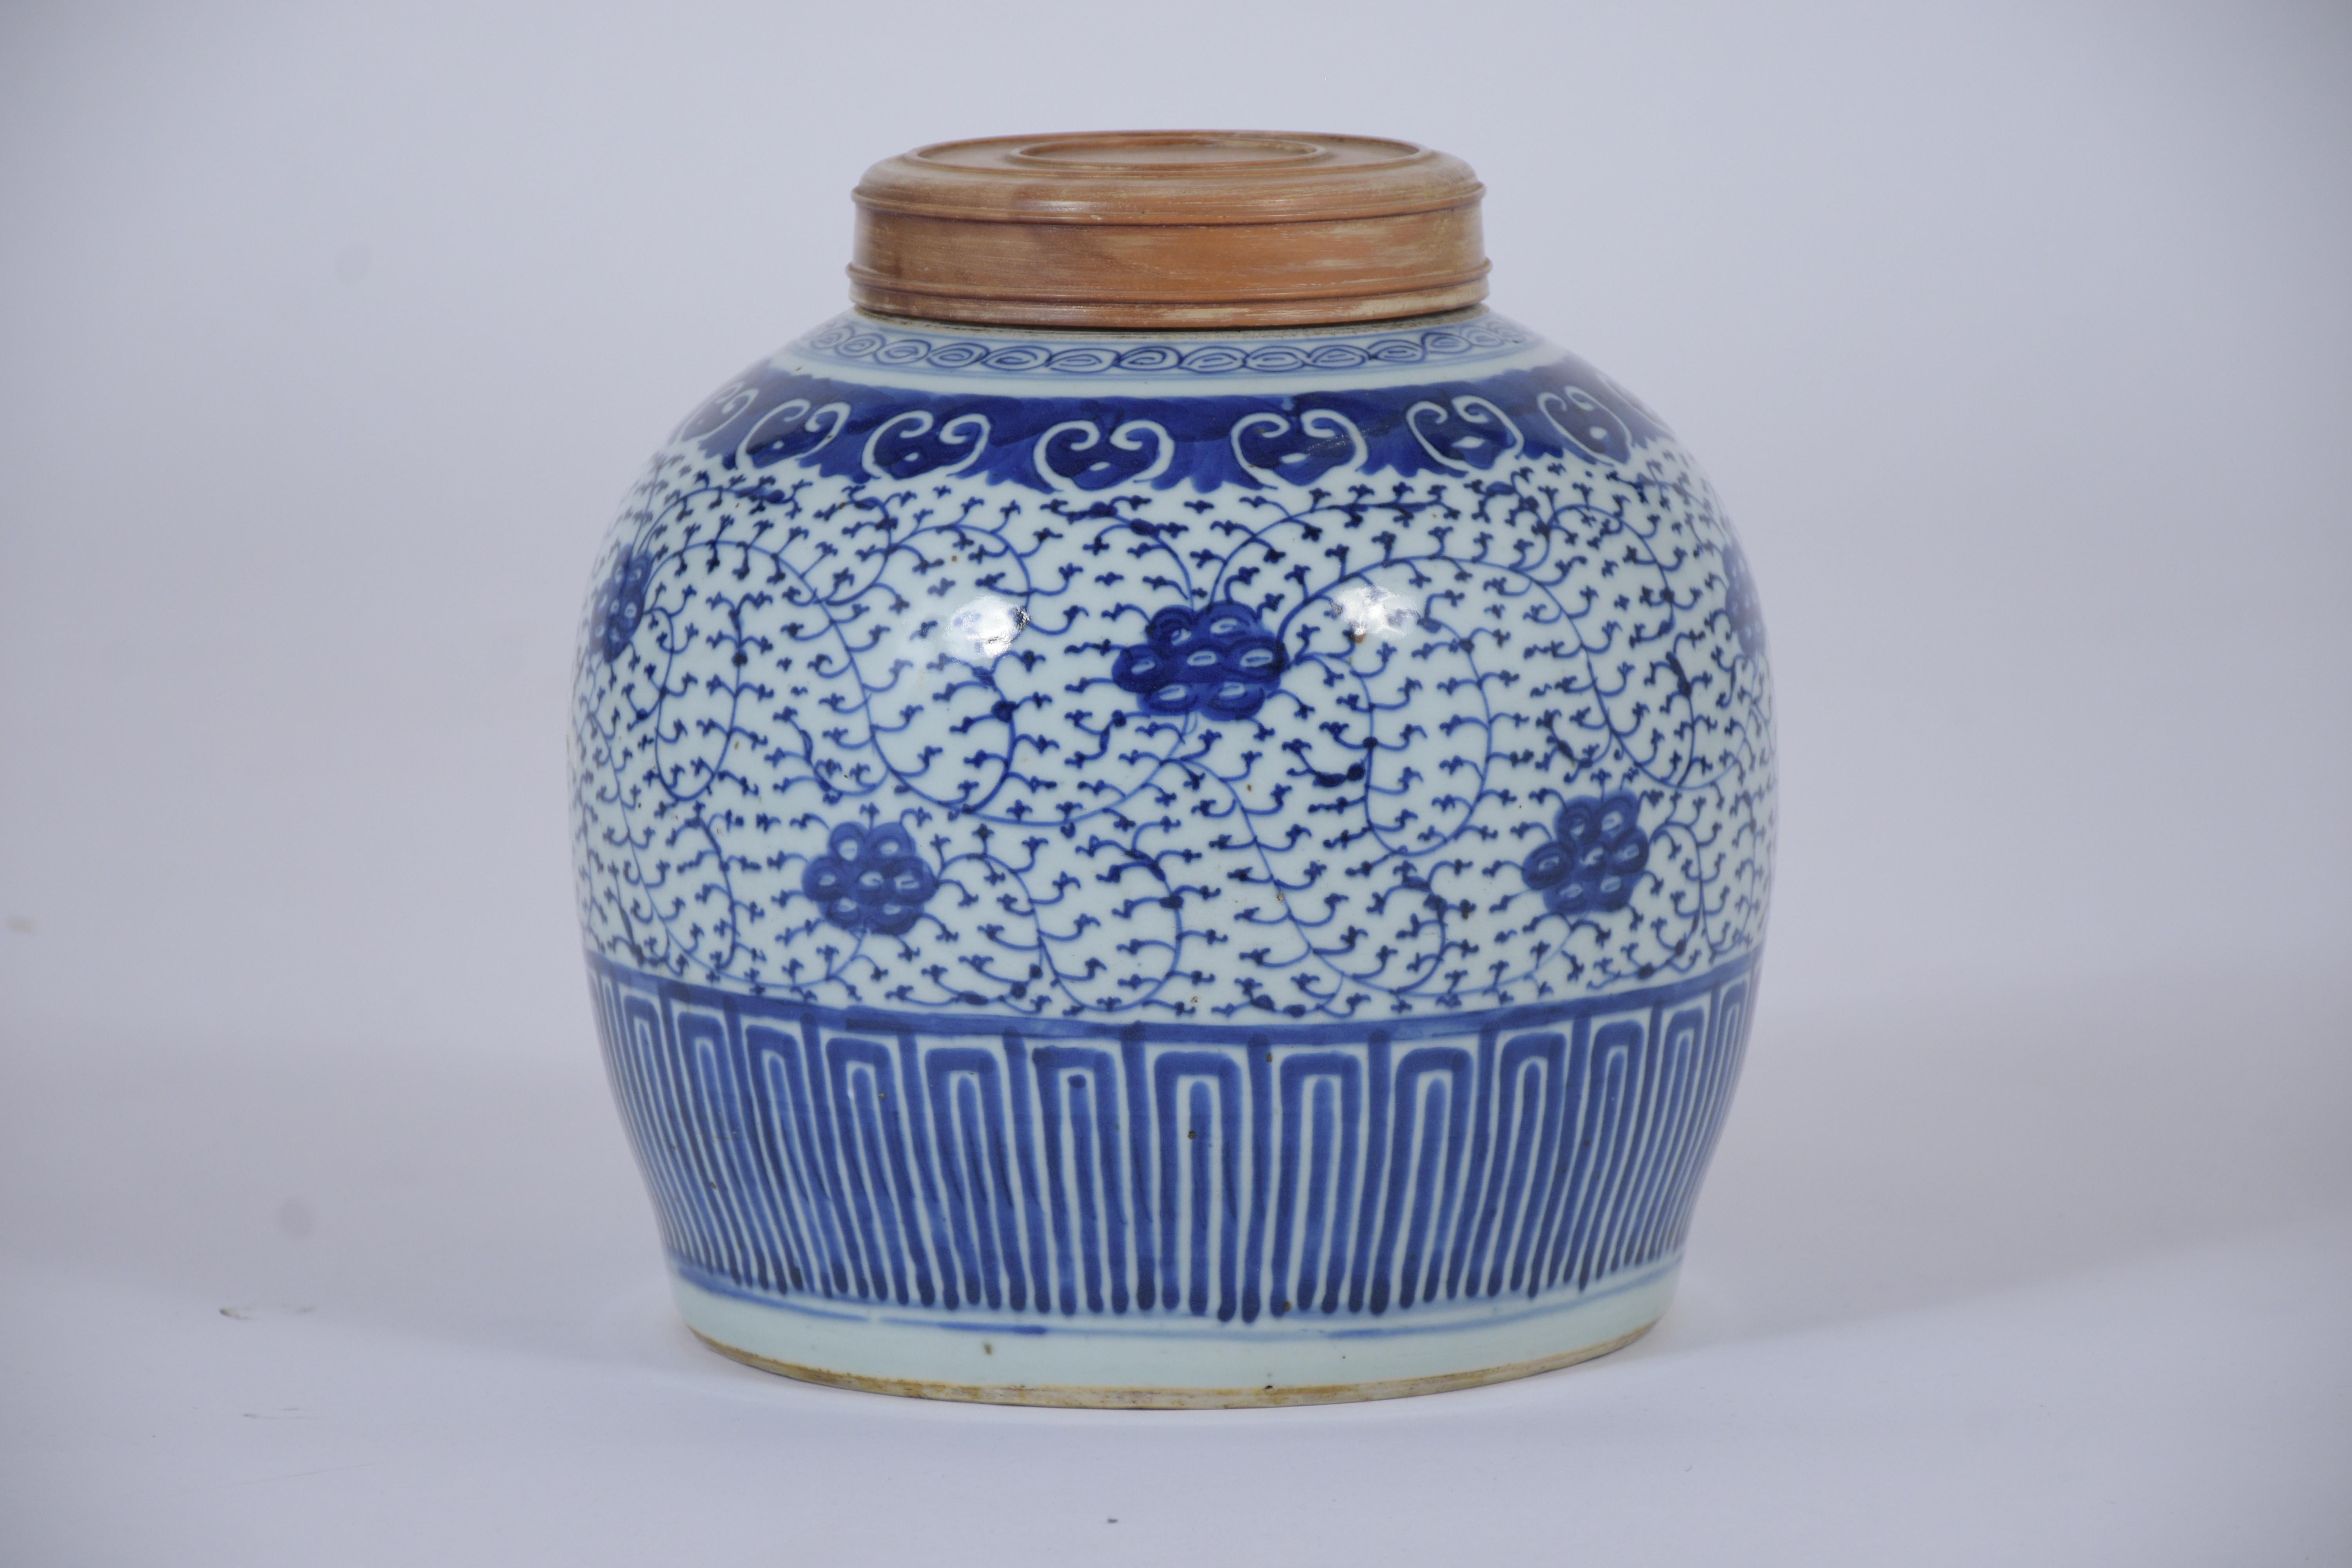 A unique Late 19th Century Chinese vase handcrafted of ceramic, this antique Jar features beautiful white and blue enameled finish detail a hand painted leaves and garland patterns design, this vase is sturdy, stunning, and ready to decorate any